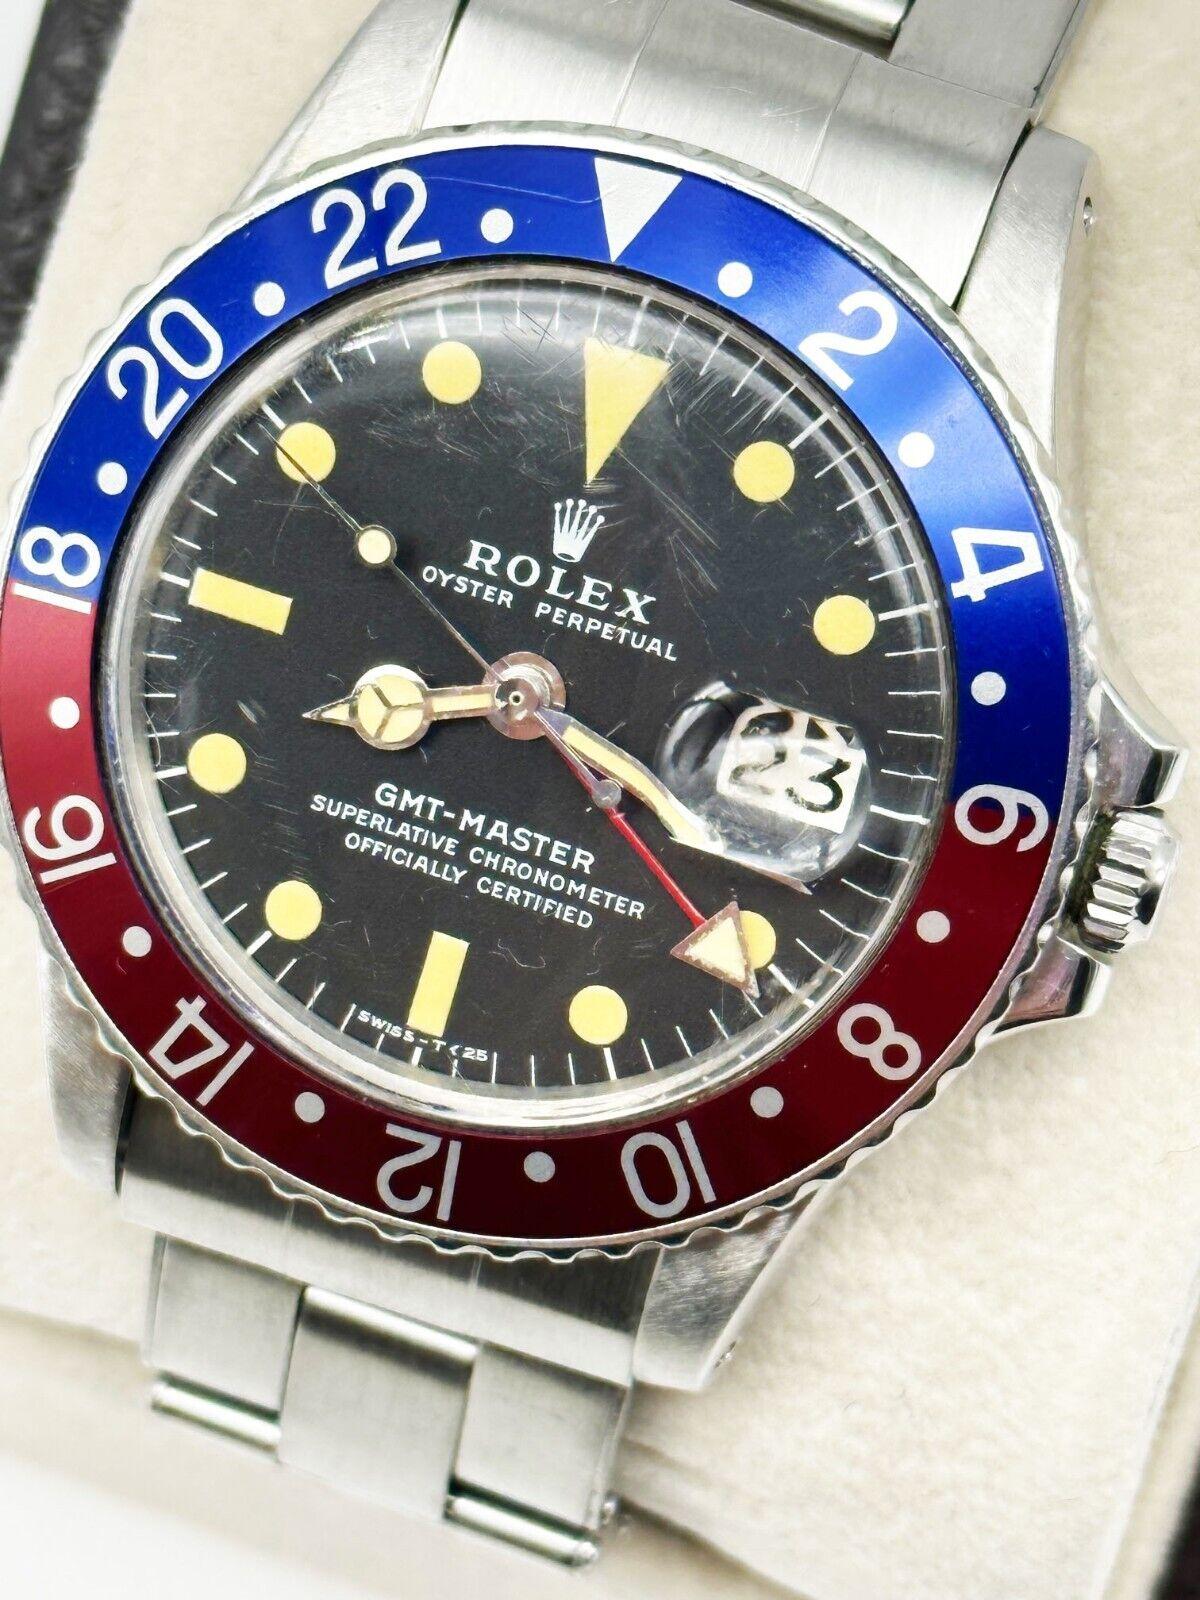 Style Number: 1675

Serial: 3113***

Year: 1972

Model: GMT Master  

Case Material: Stainless Steel  

Band: Stainless Steel 

Bezel:  Pepsi - Red and Blue

Dial: Black

Face: Sapphire Crystal 

Case Size: 40mm 

Includes: 

-Rolex Box &